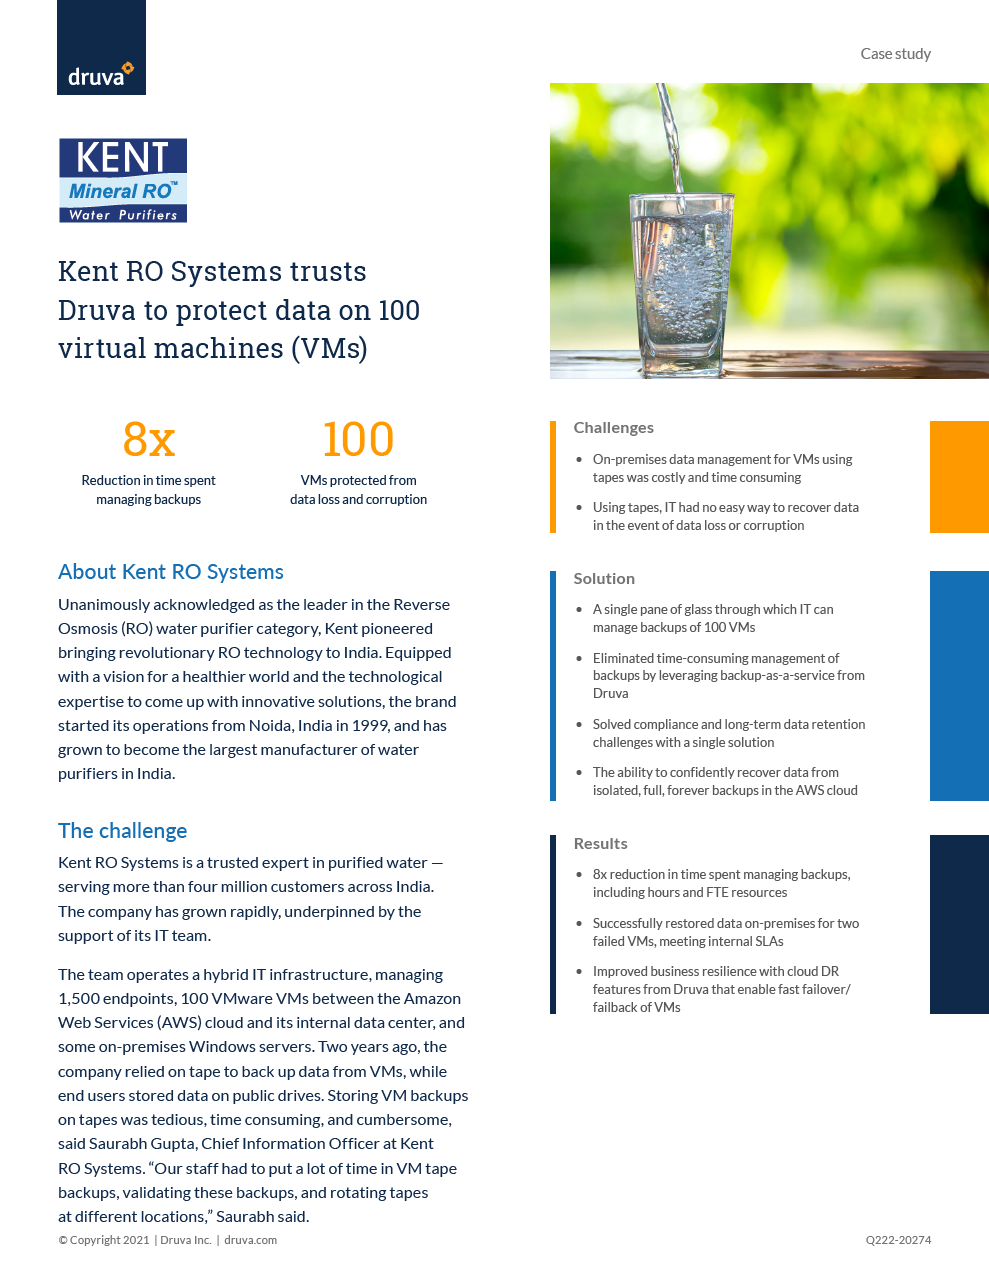 Kent RO Systems protects 100 VMs with Druva